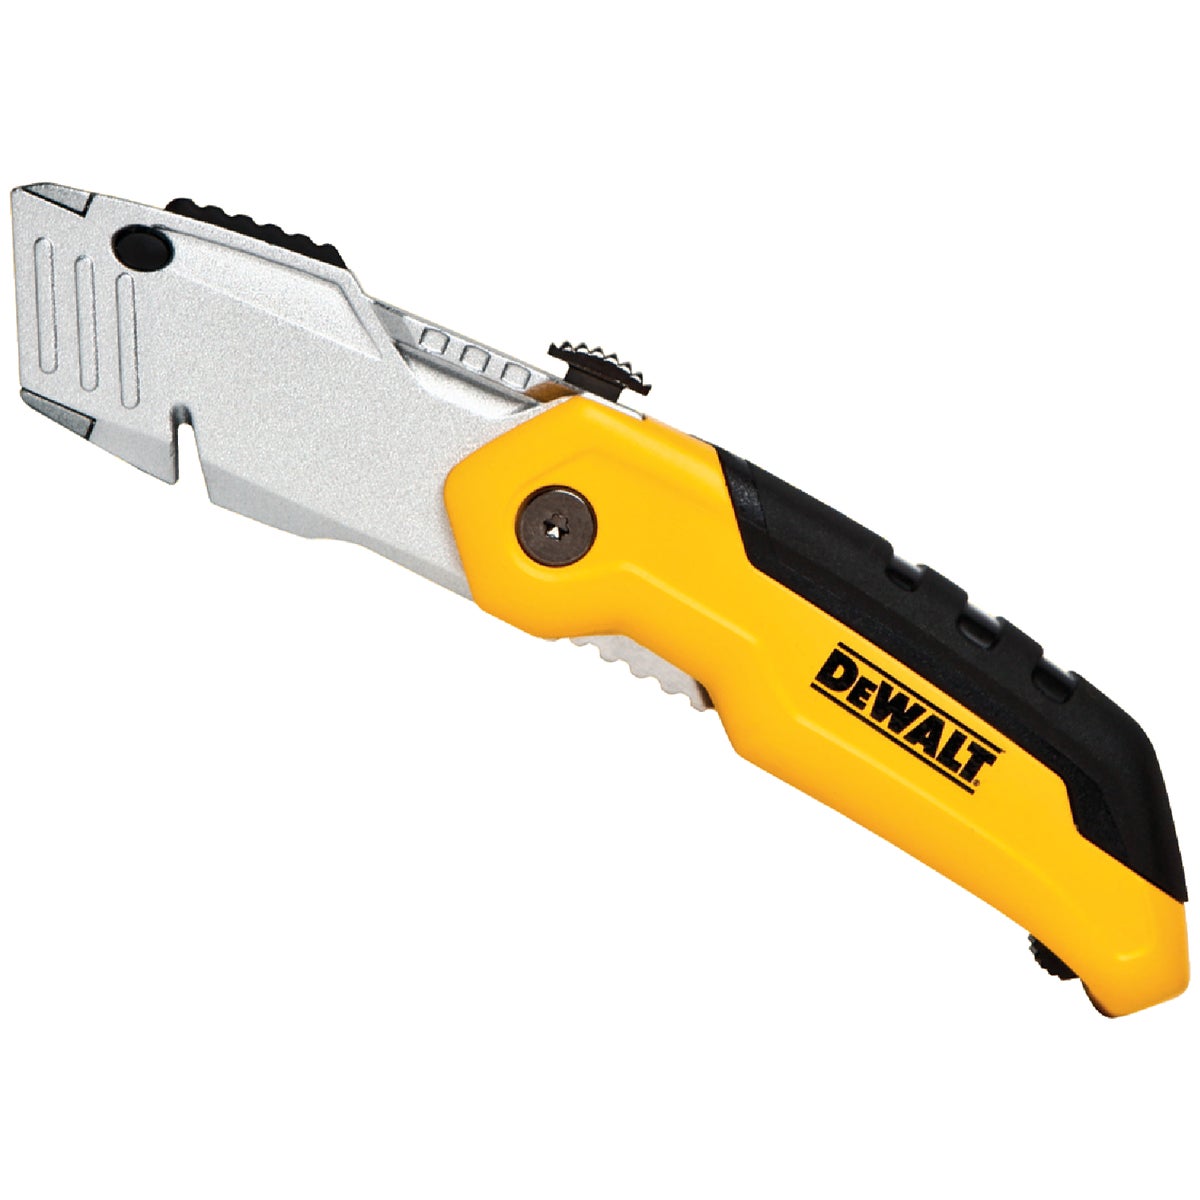 Item 364359, Retractable blade offers variable cut depth.